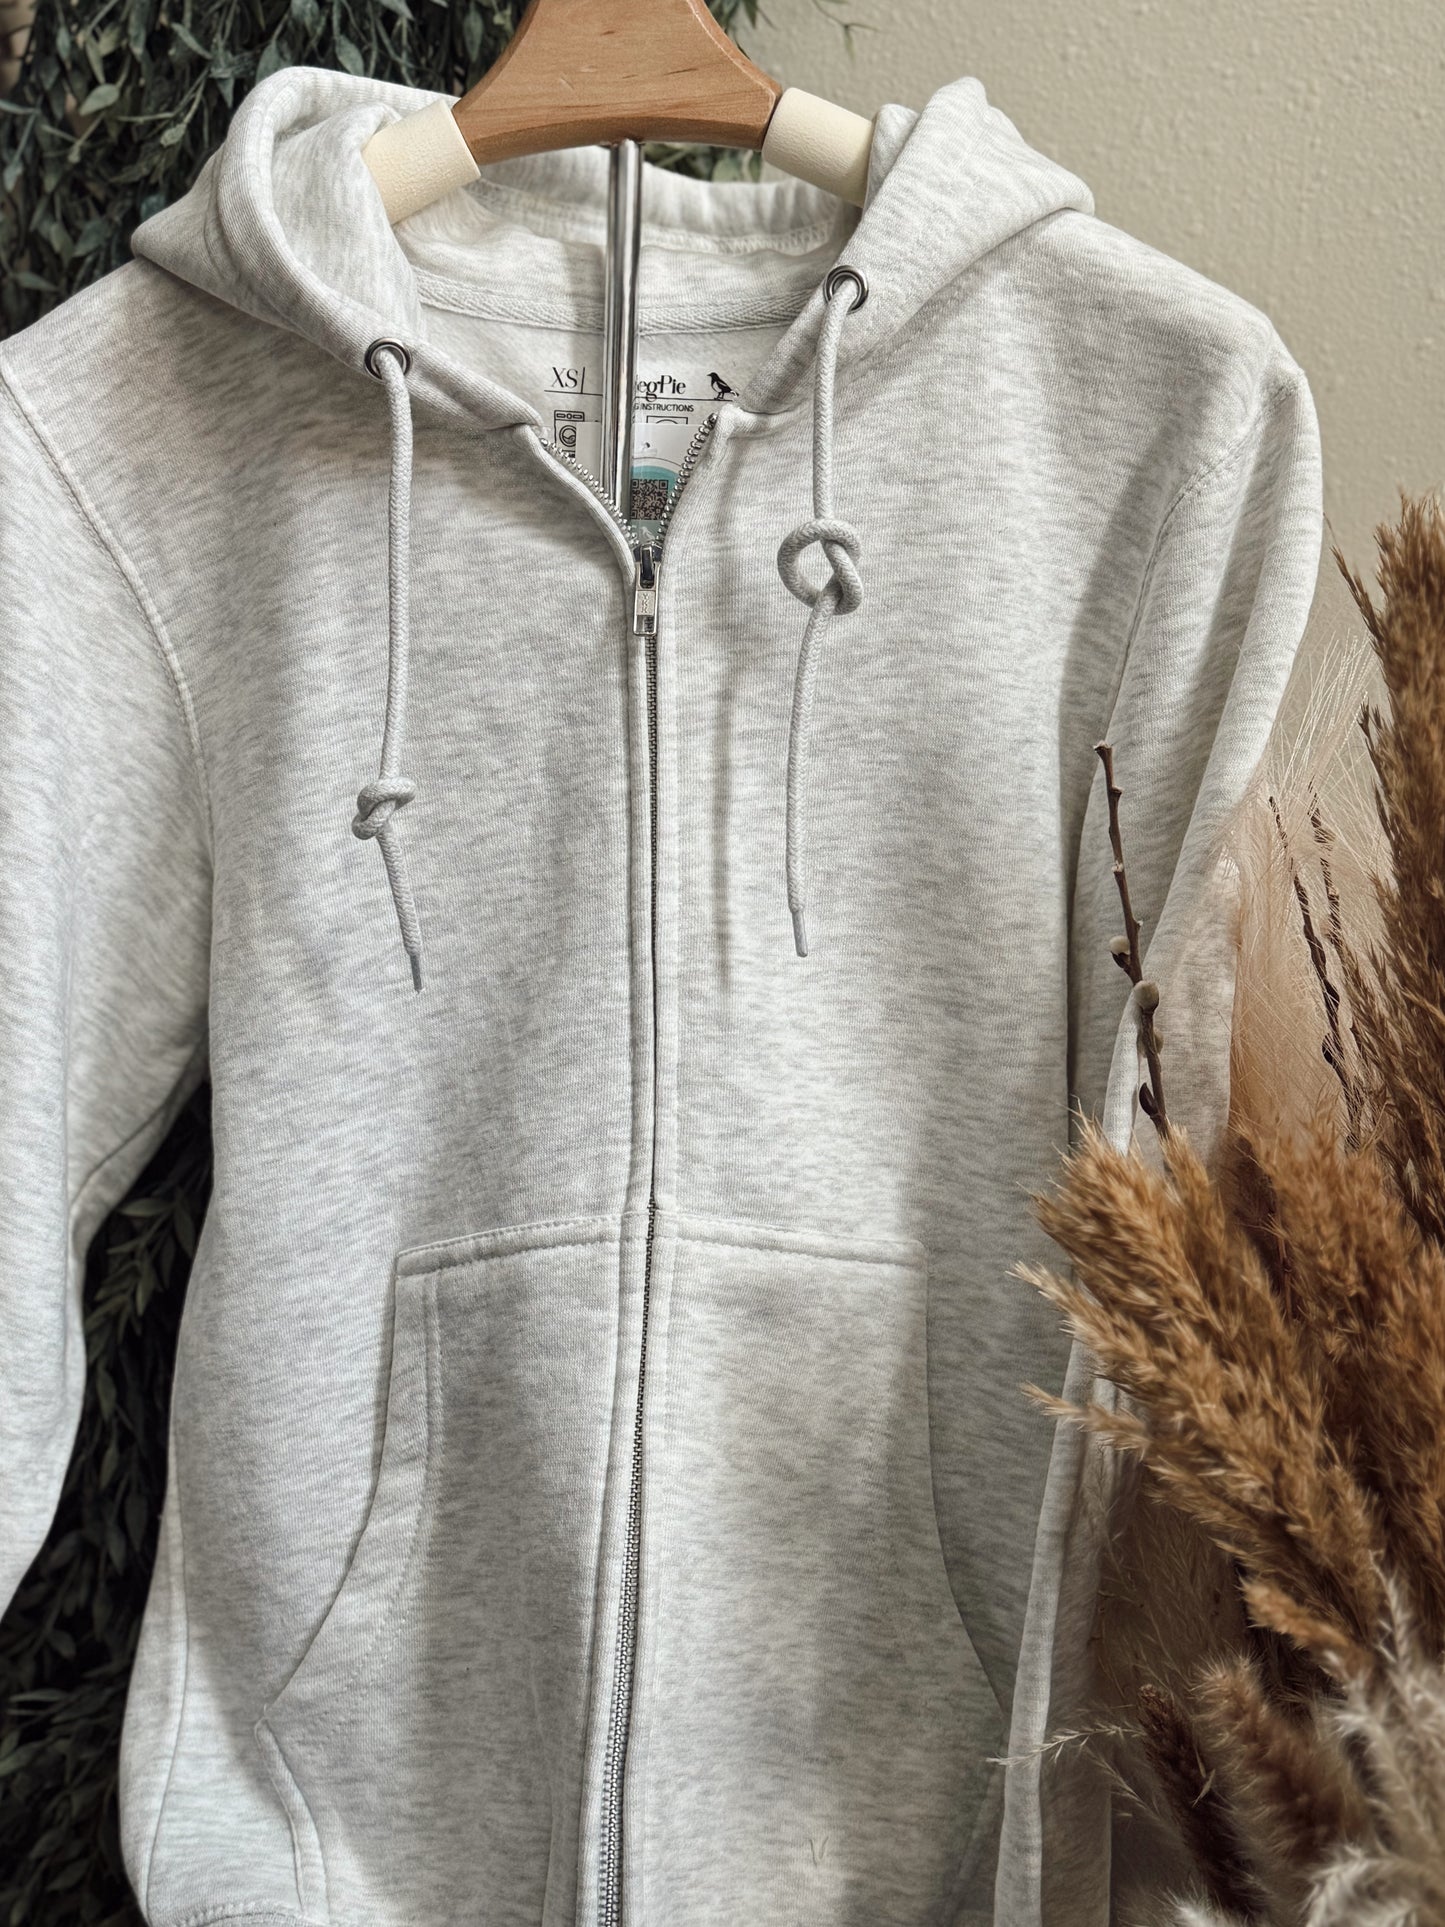 FIND HIM Zip-up | Oatmeal Heather